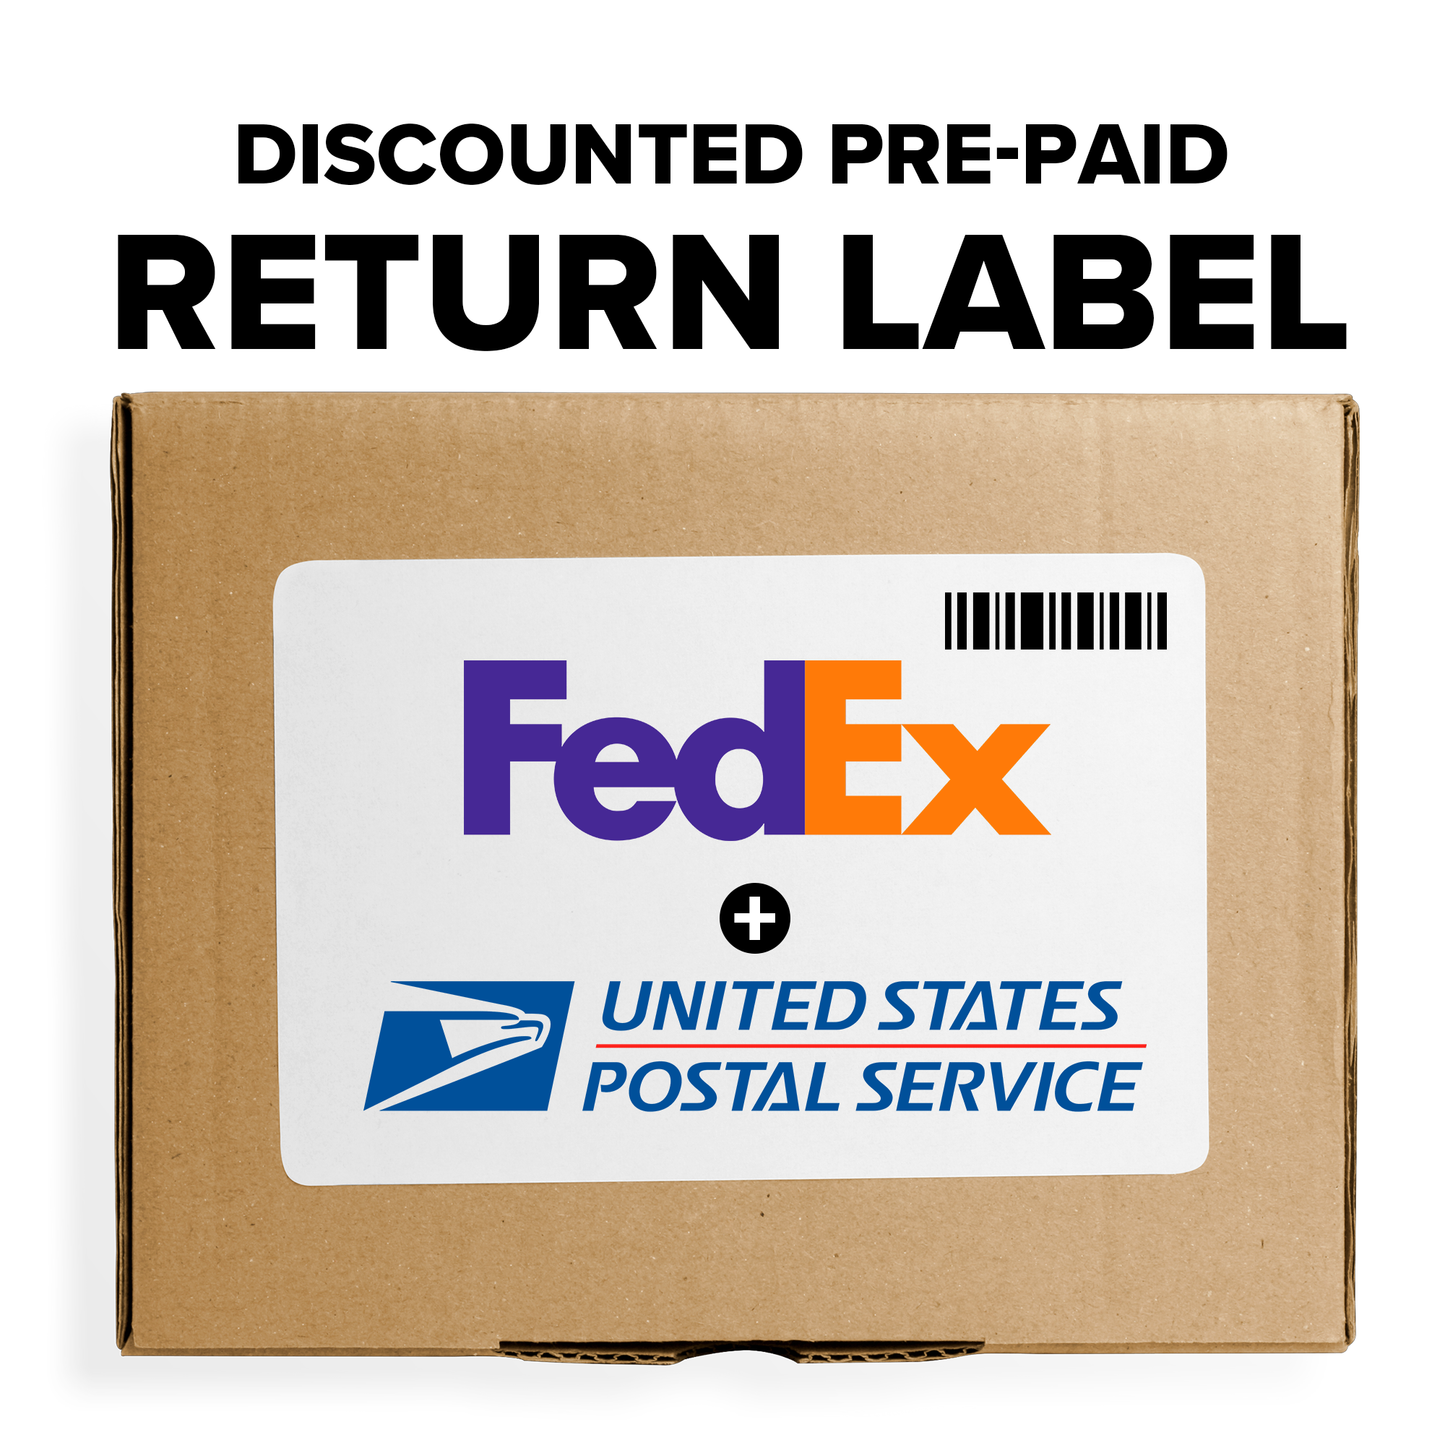 Discounted Pre-Paid Return Label